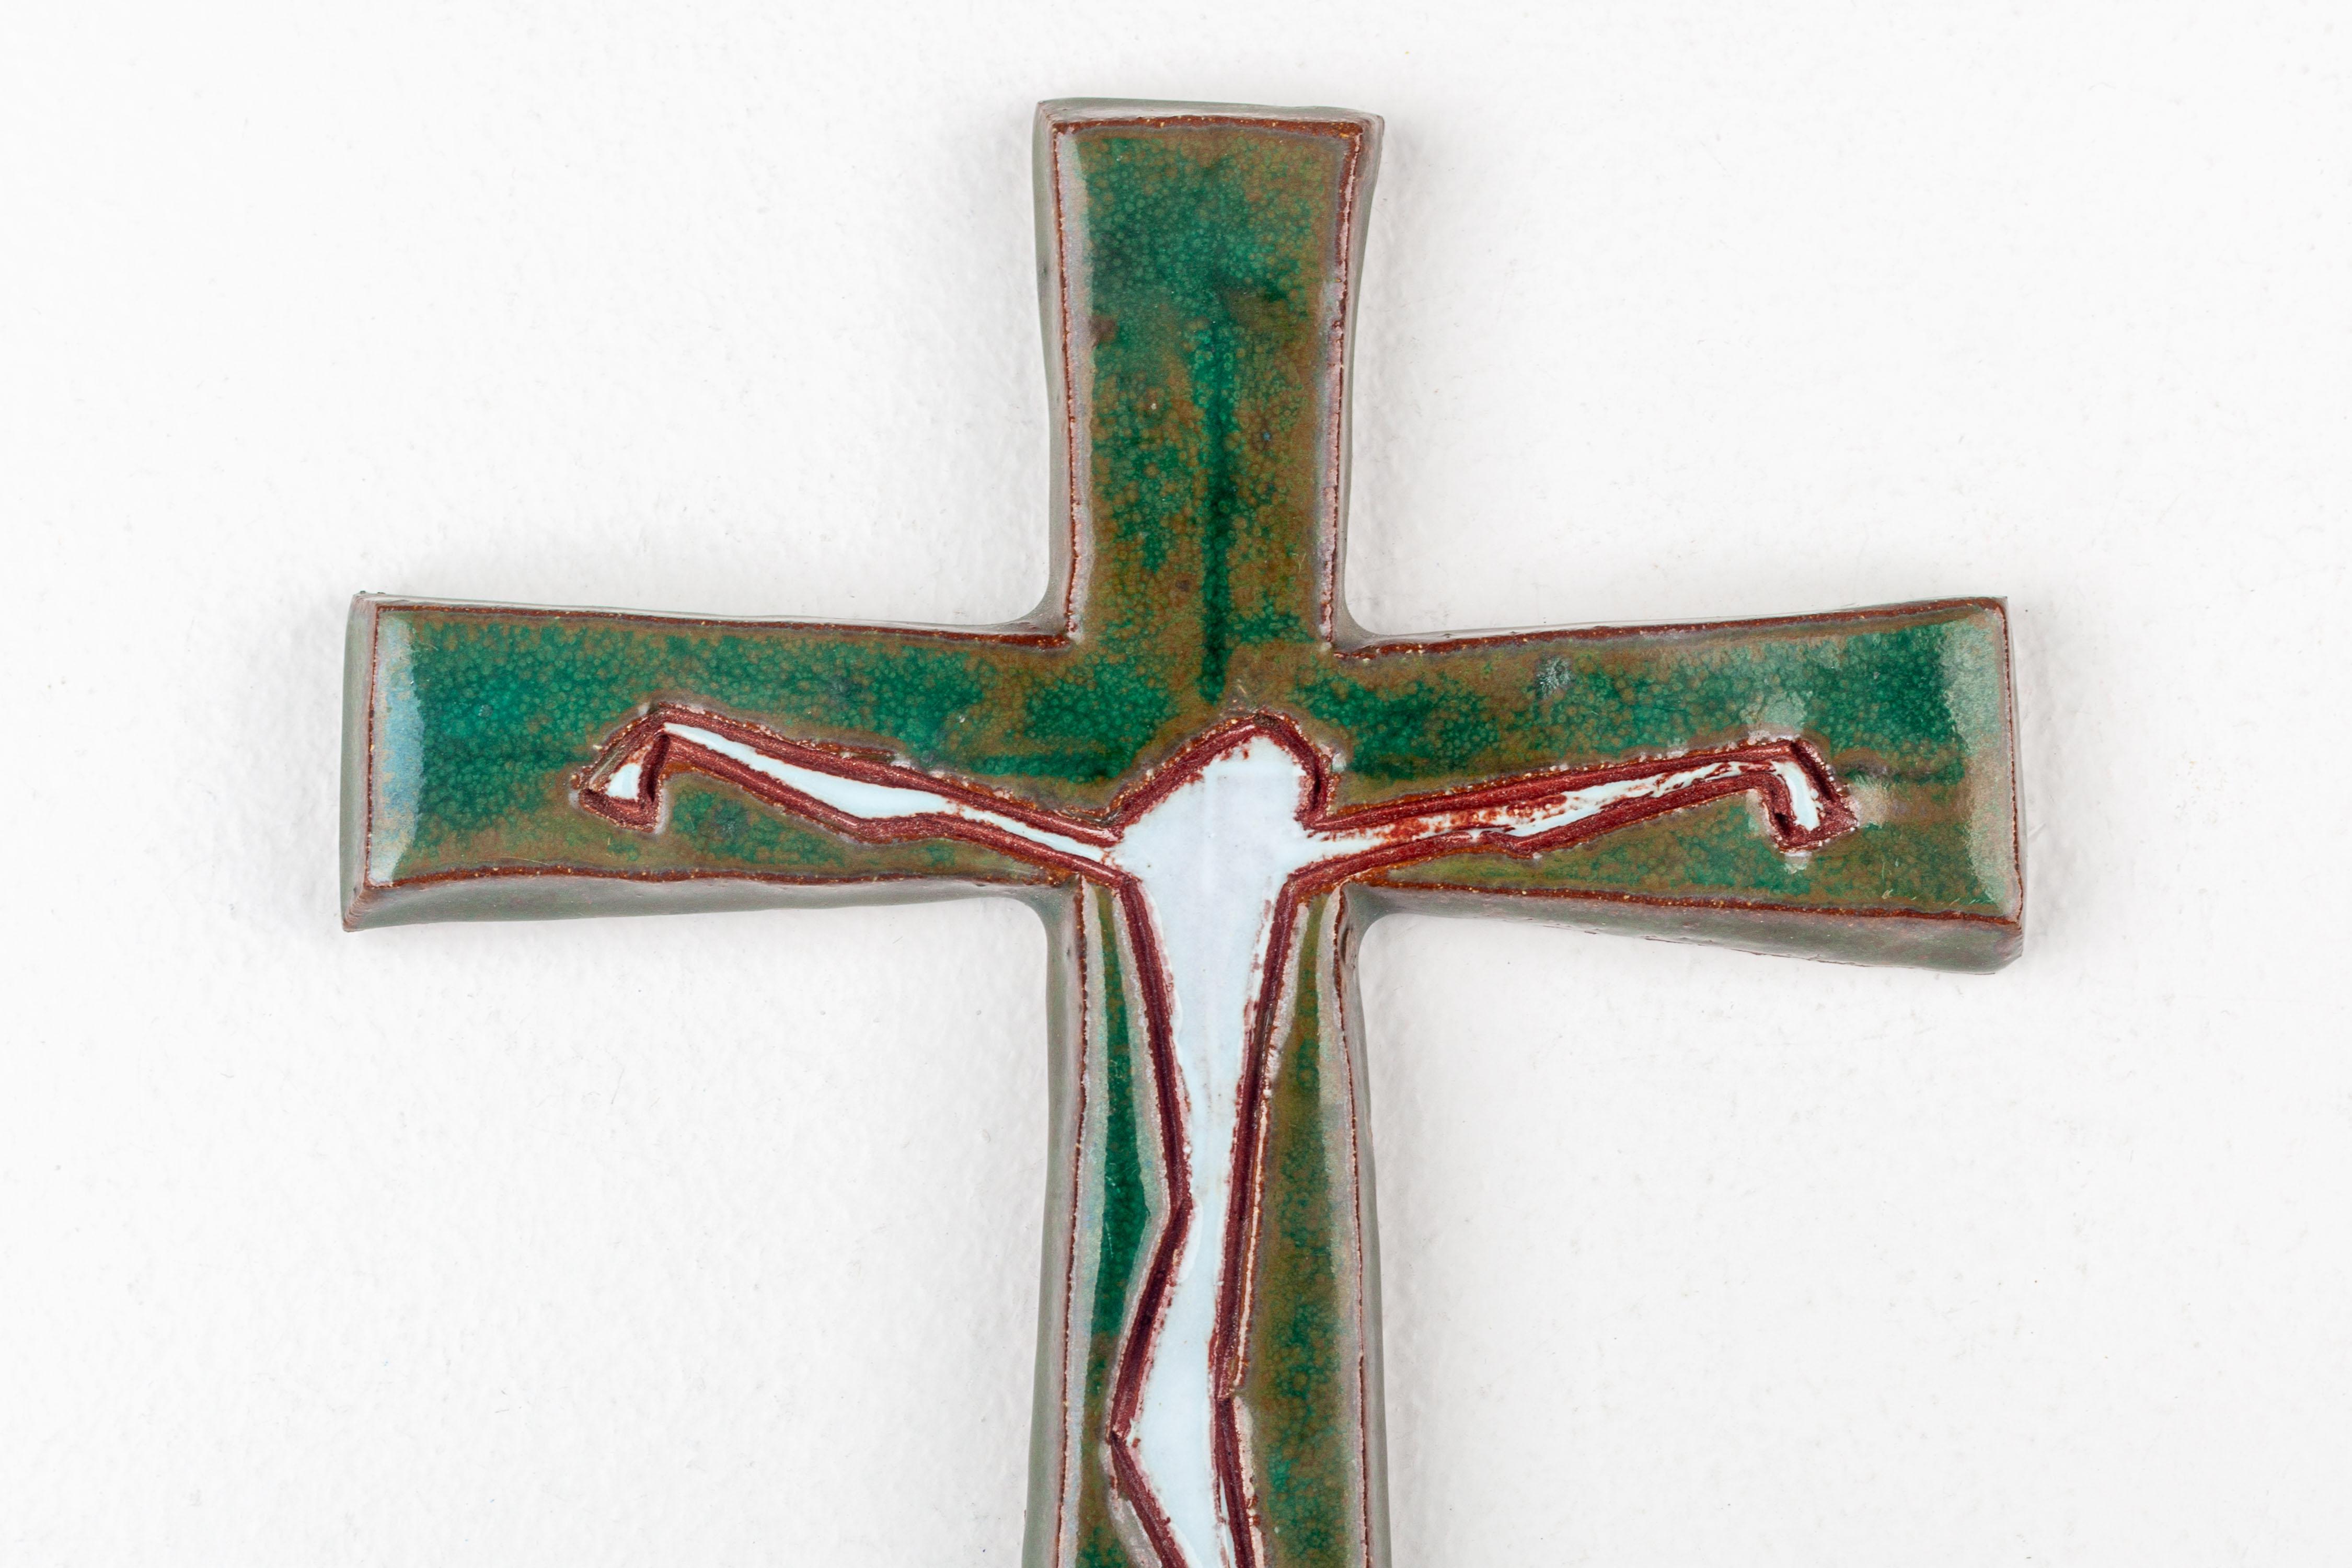  Ceramic Mid-century Abstract Crucifixion, Studio Pottery, Handmade in Europe For Sale 1